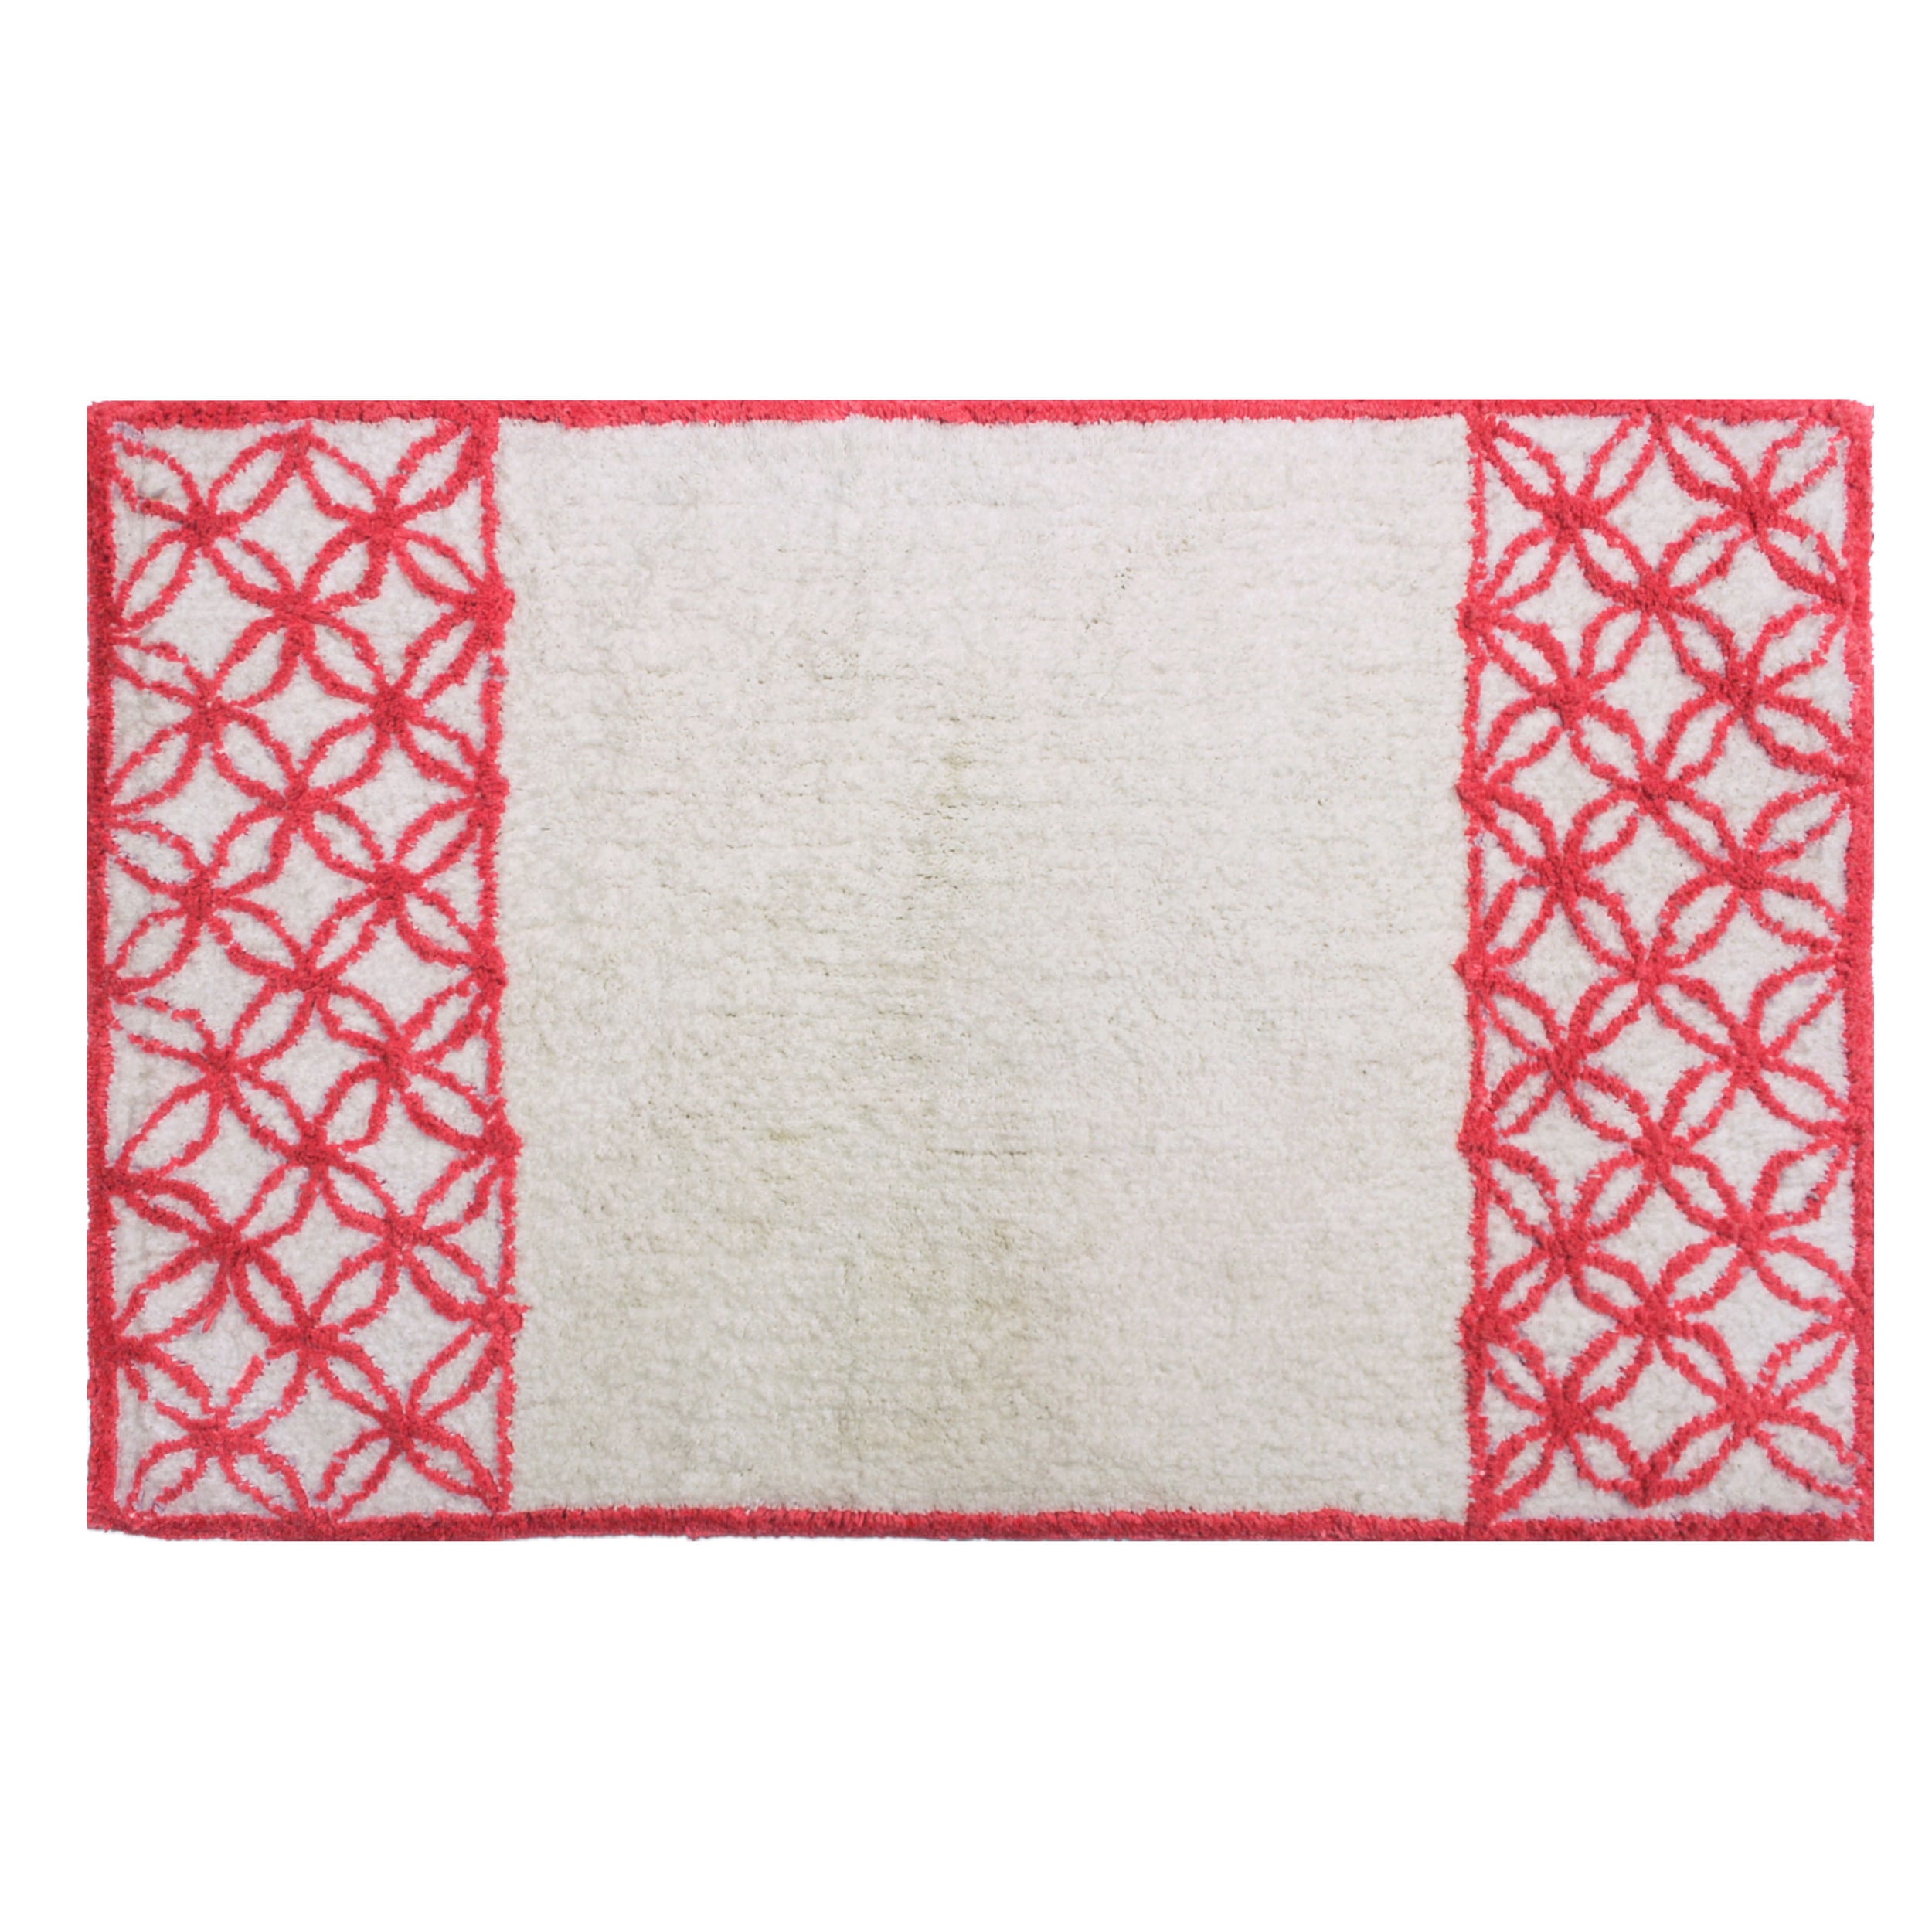 Sherry Kline Romance Cotton 21x34 inch Coral Bath Rug (Coral Materials 100 percent cotton Care instructions Machine washable The digital images we display have the most accurate color possible. However, due to differences in computer monitors, we cannot